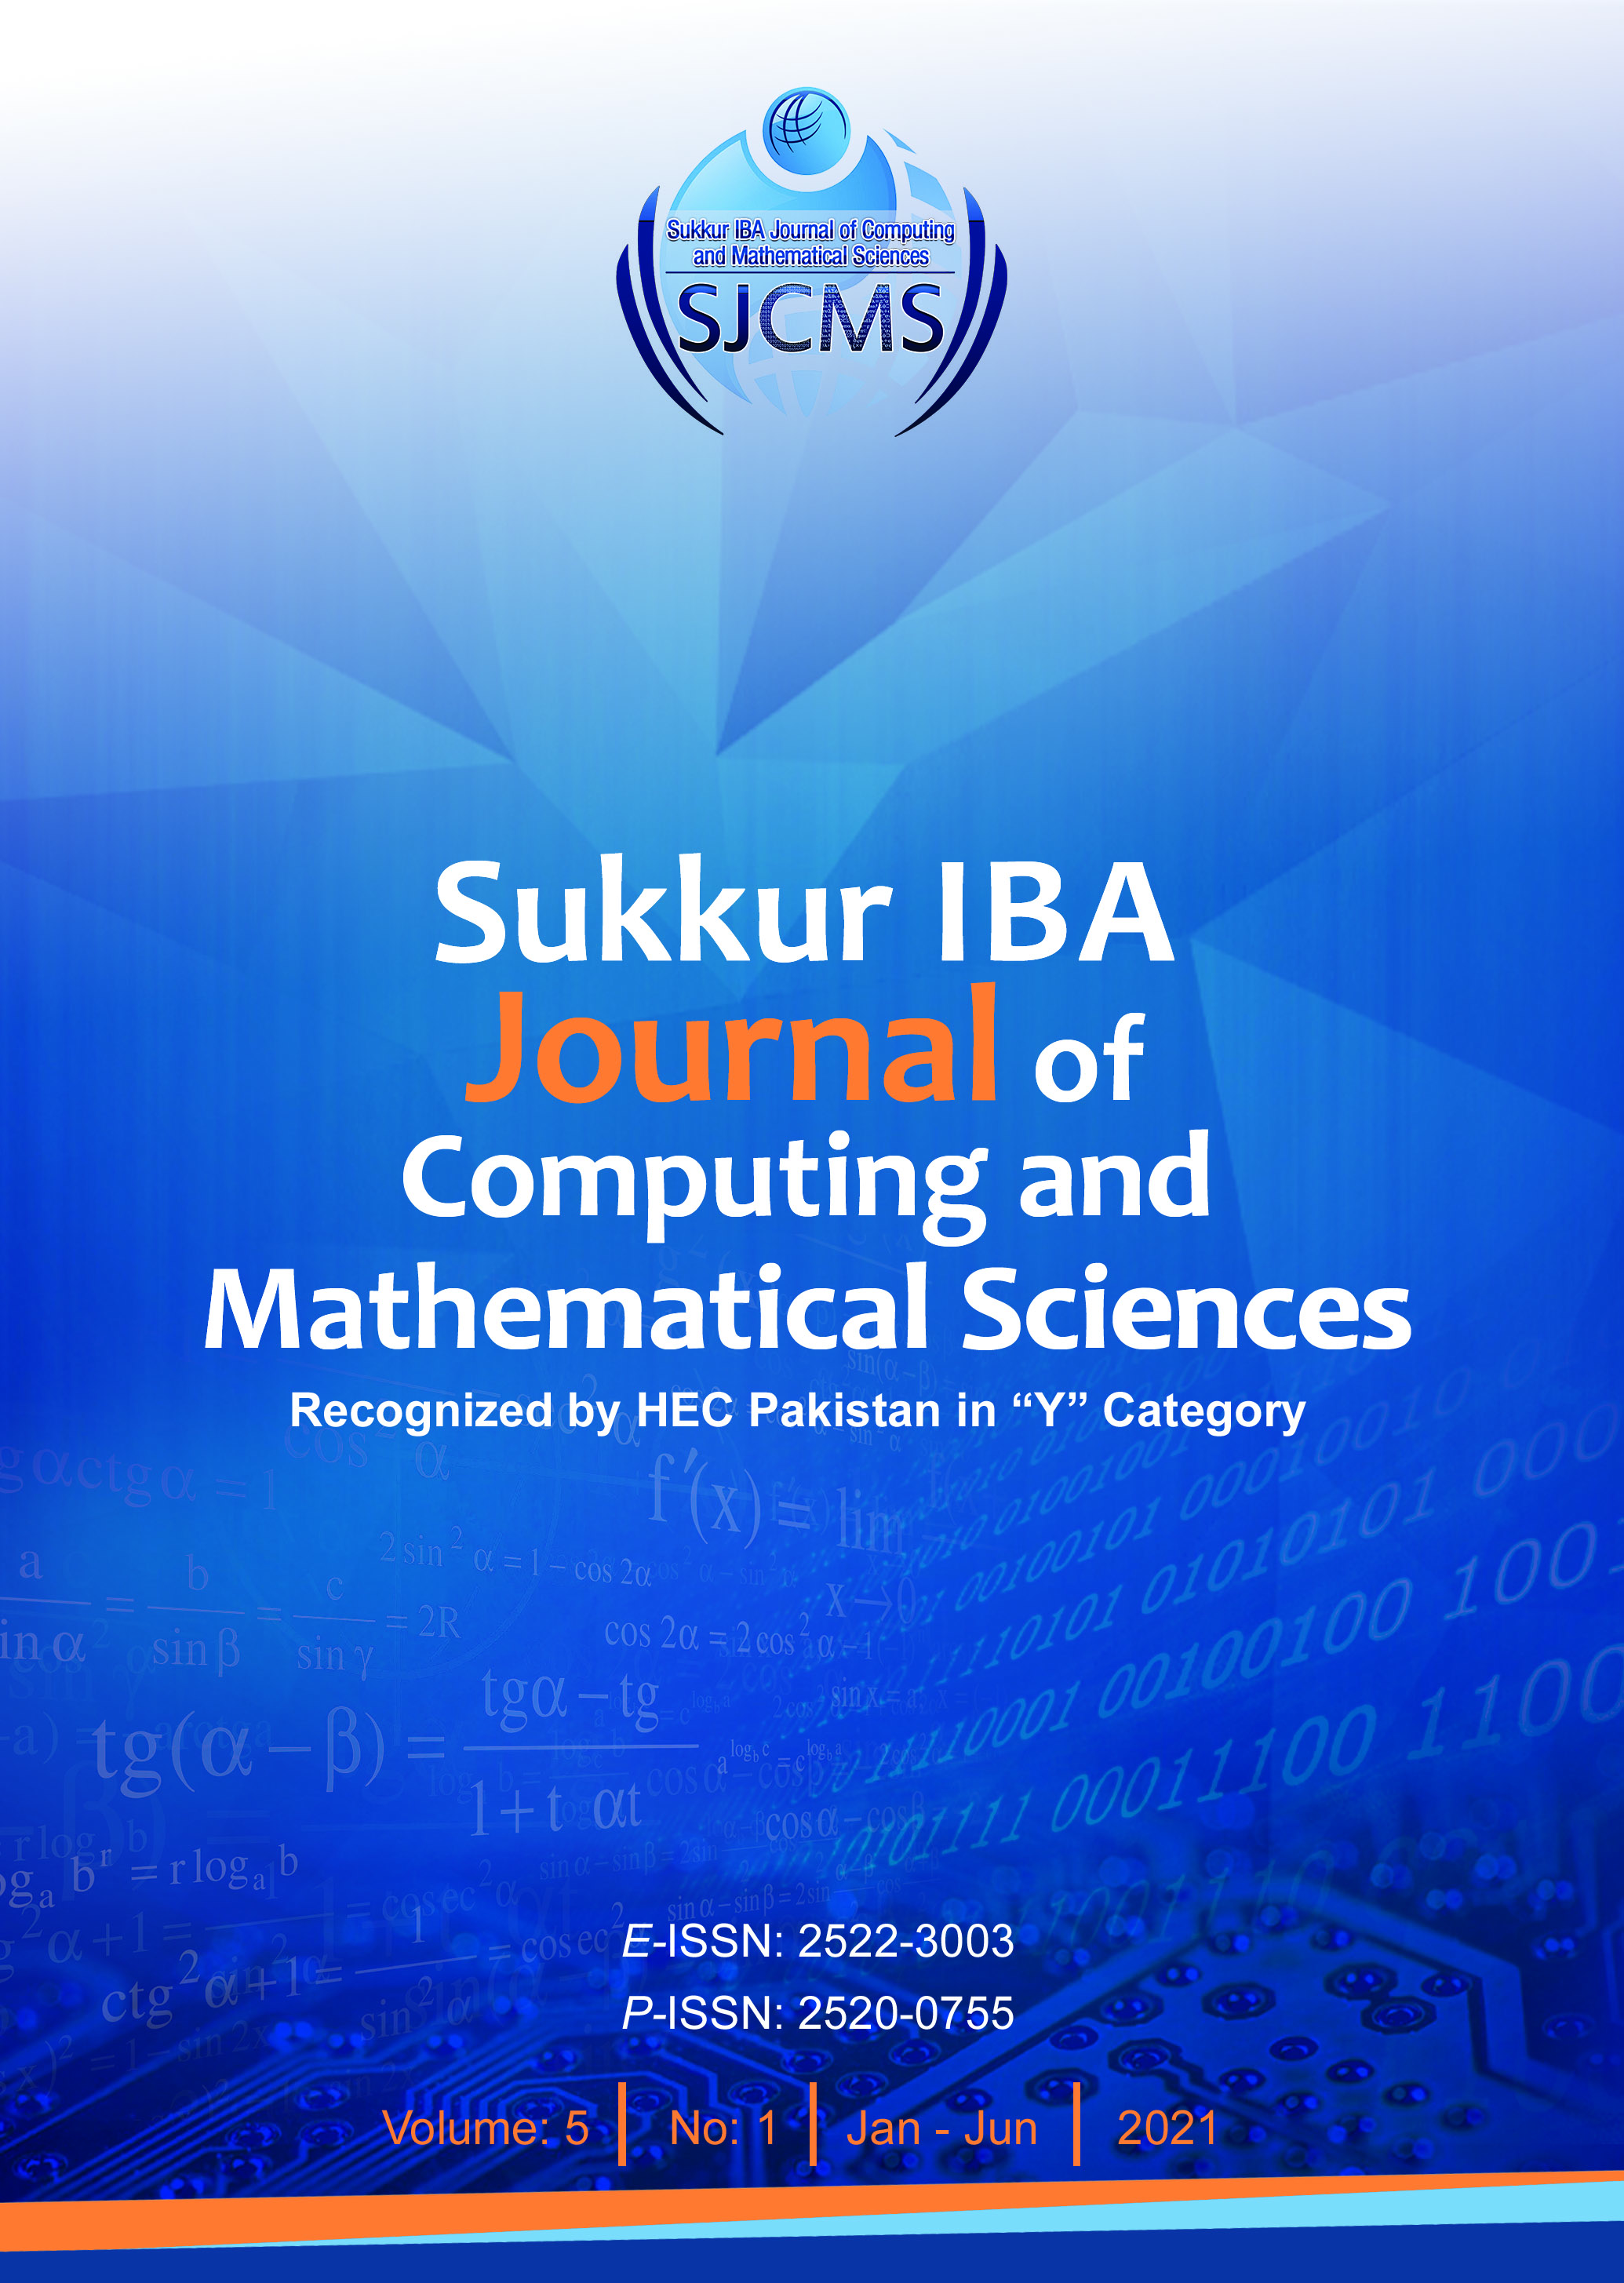 					View Vol. 5 No. 1 (2021): Sukkur IBA Journal of Computing and Mathematical Sciences-SJCMS -January-June 2021 (ONLINE FIRST)
				